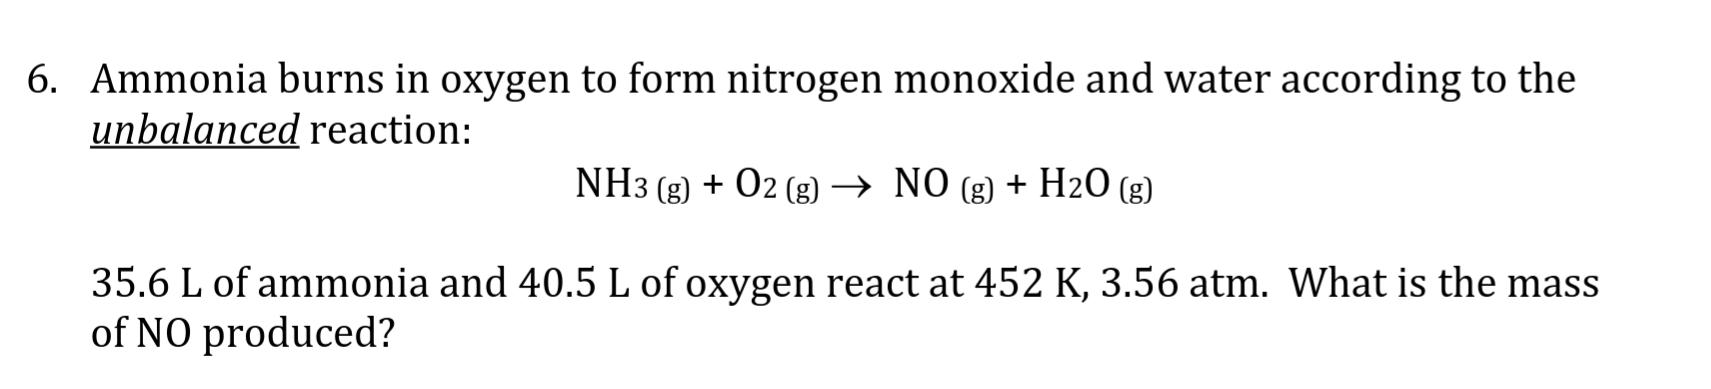 6. Ammonia burns in oxygen to form nitrogen monoxide and water according to the
unbalanced reaction:
NH3 (g)O2 (g) -> NO (g) + H20 (g)
_
35.6 L of ammonia and 40.5 L of oxygen react at 452 K, 3.56 atm. What is the mass
of NO produced?
